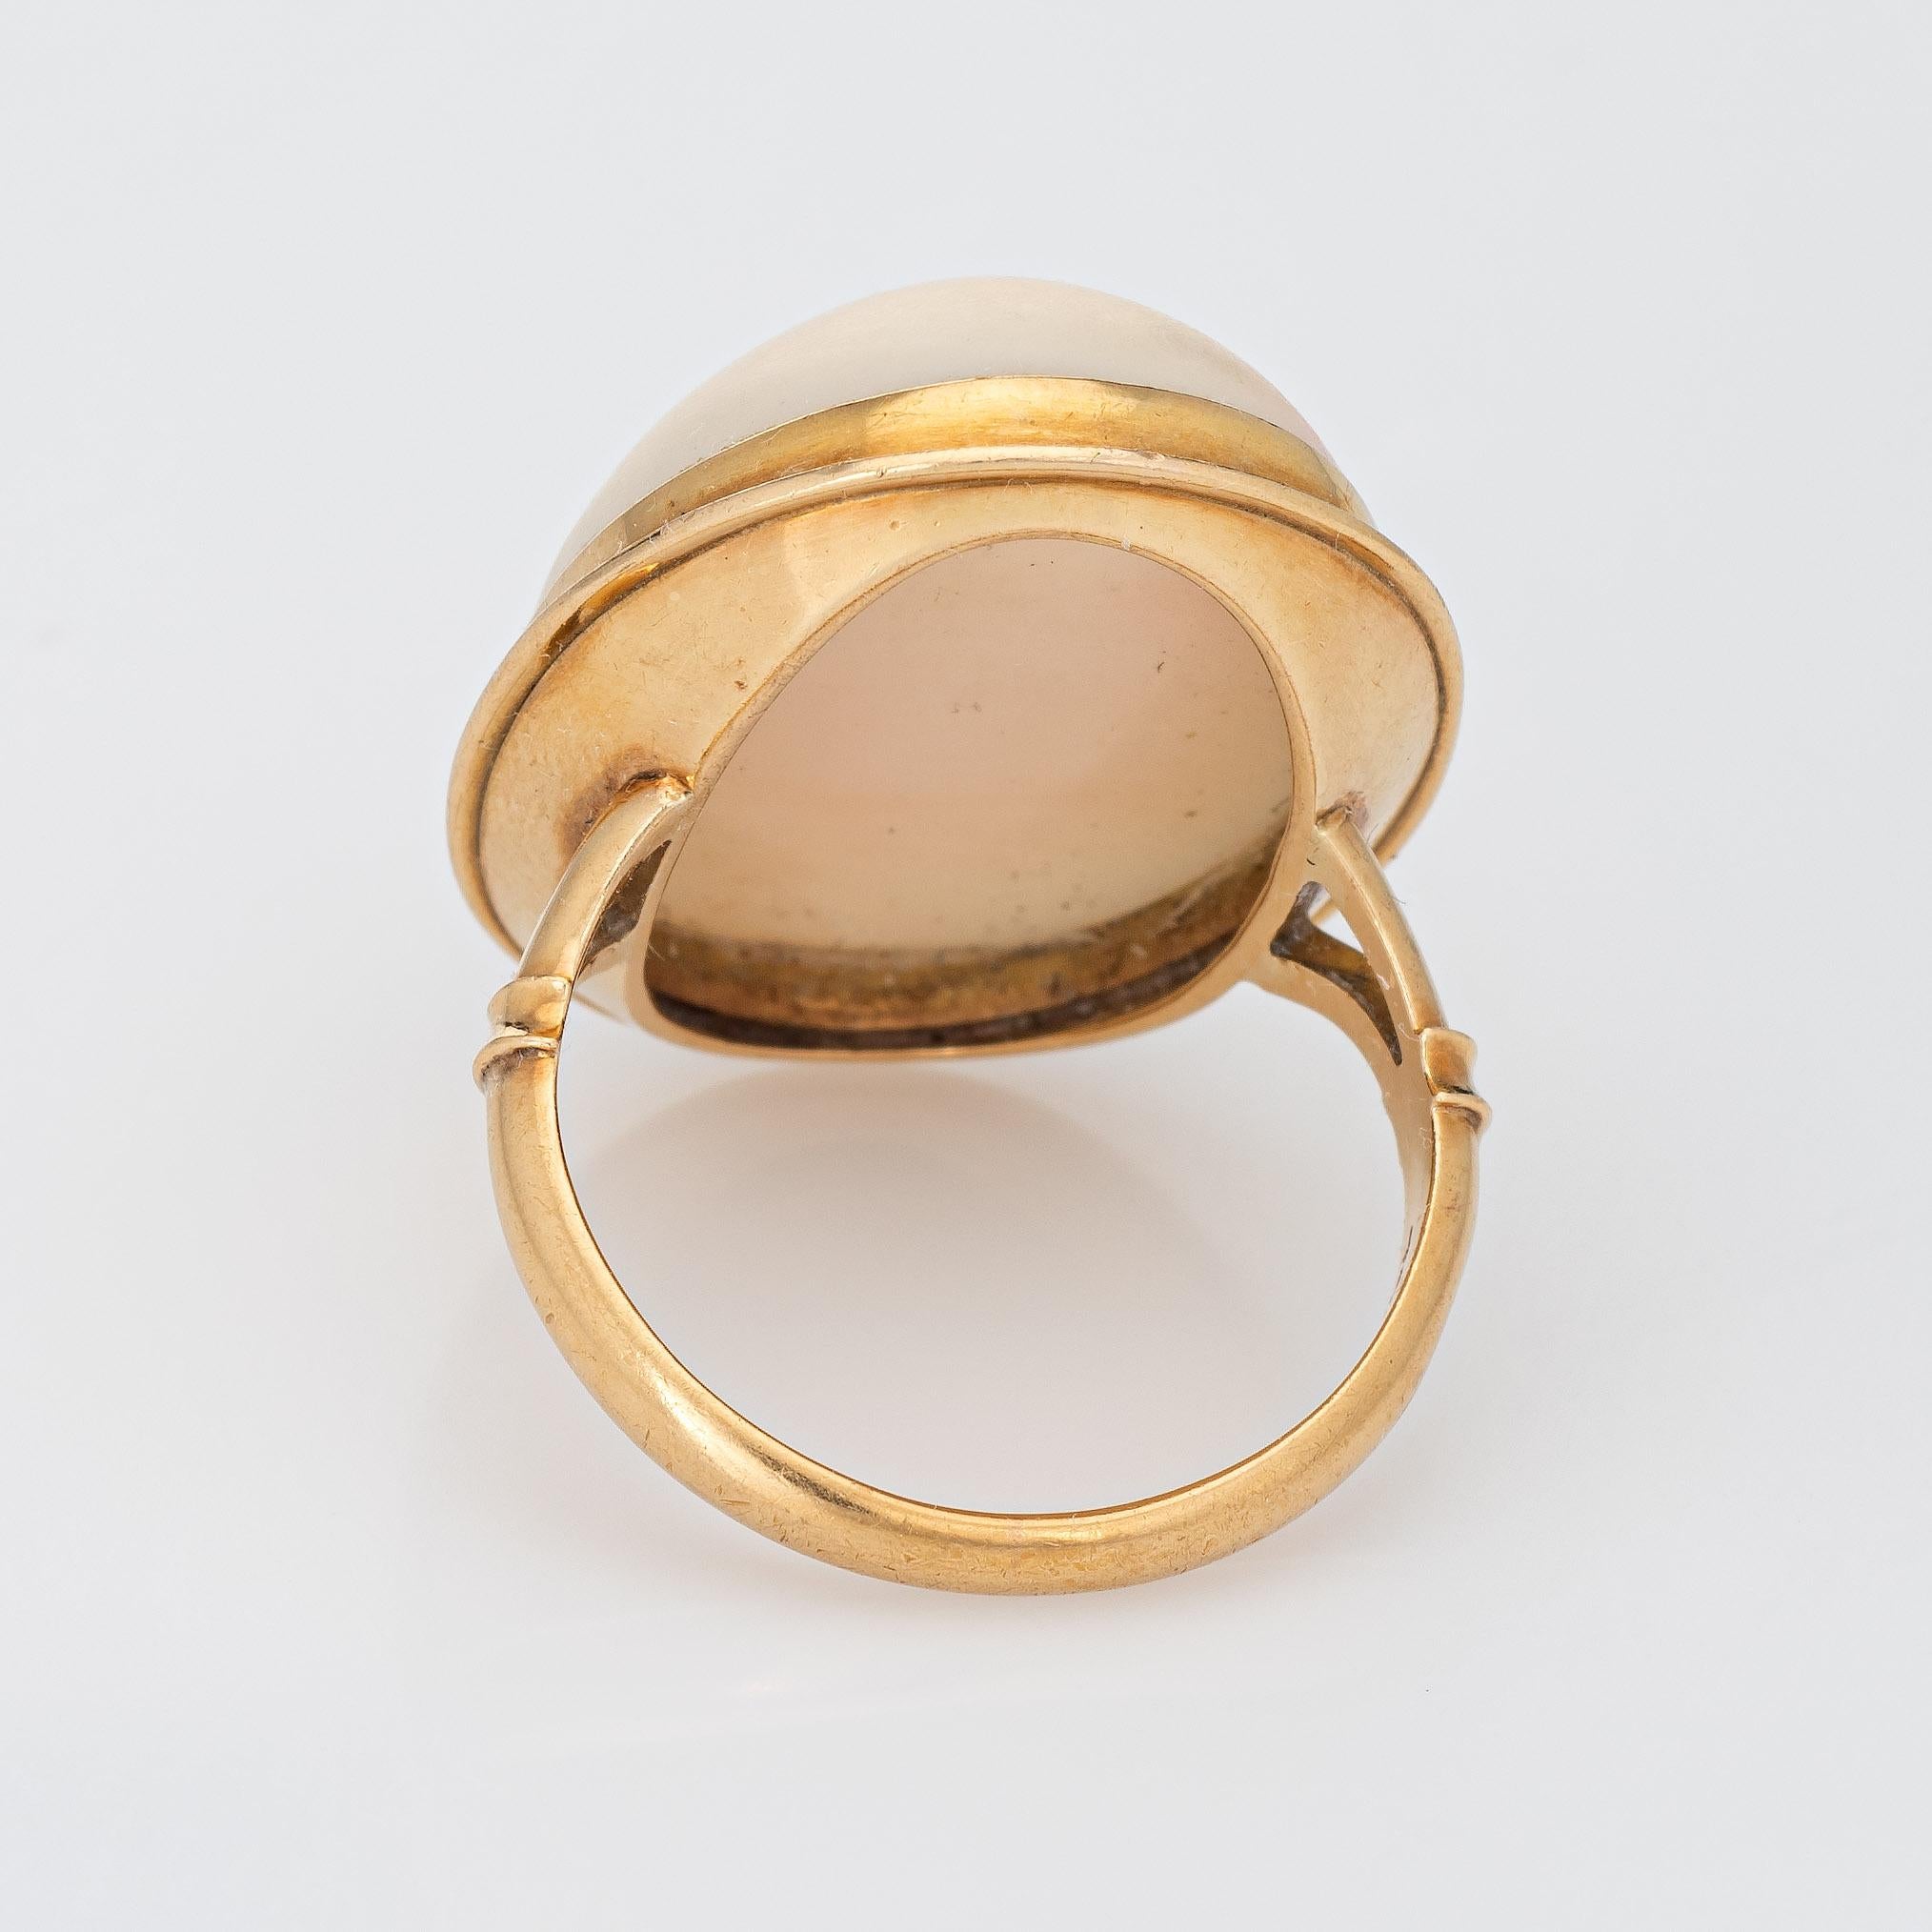 Cabochon Angel Skin Coral Ring Vintage 18k Gold Large Oval Cocktail Jewelry Estate